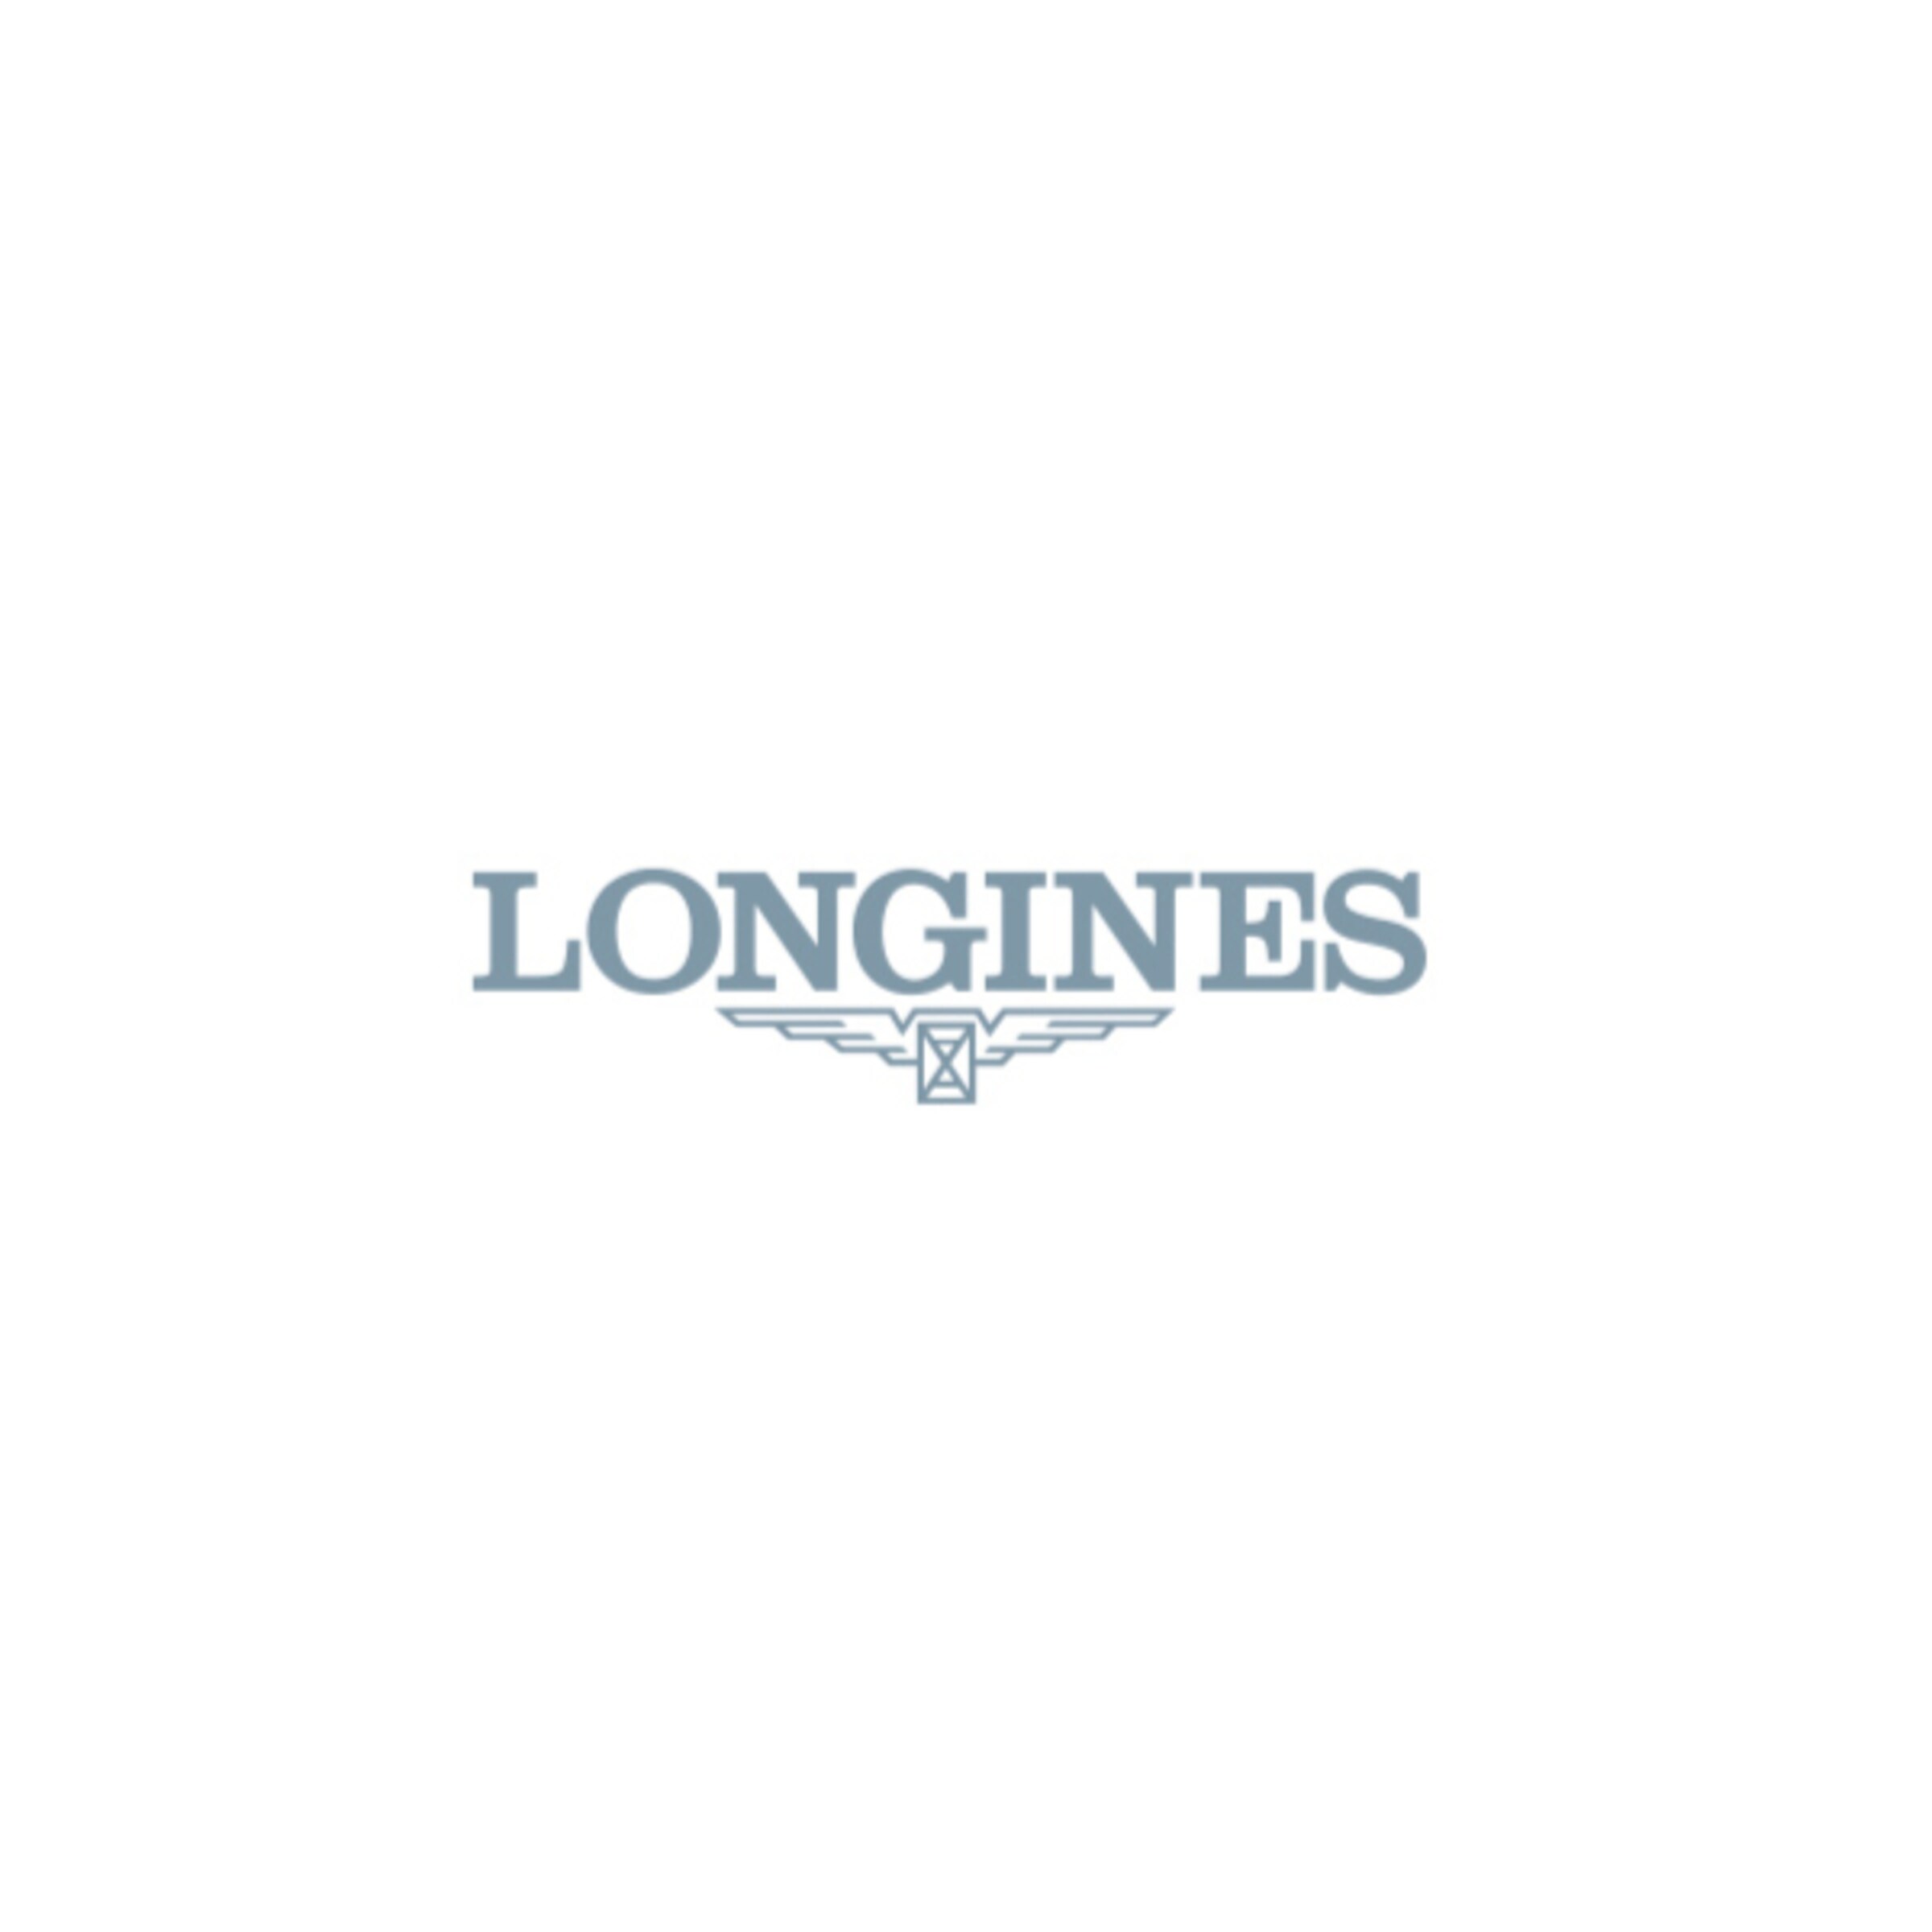 Longines THE LONGINES LEGEND DIVER WATCH Automatic Stainless steel Watch - L3.774.4.30.2